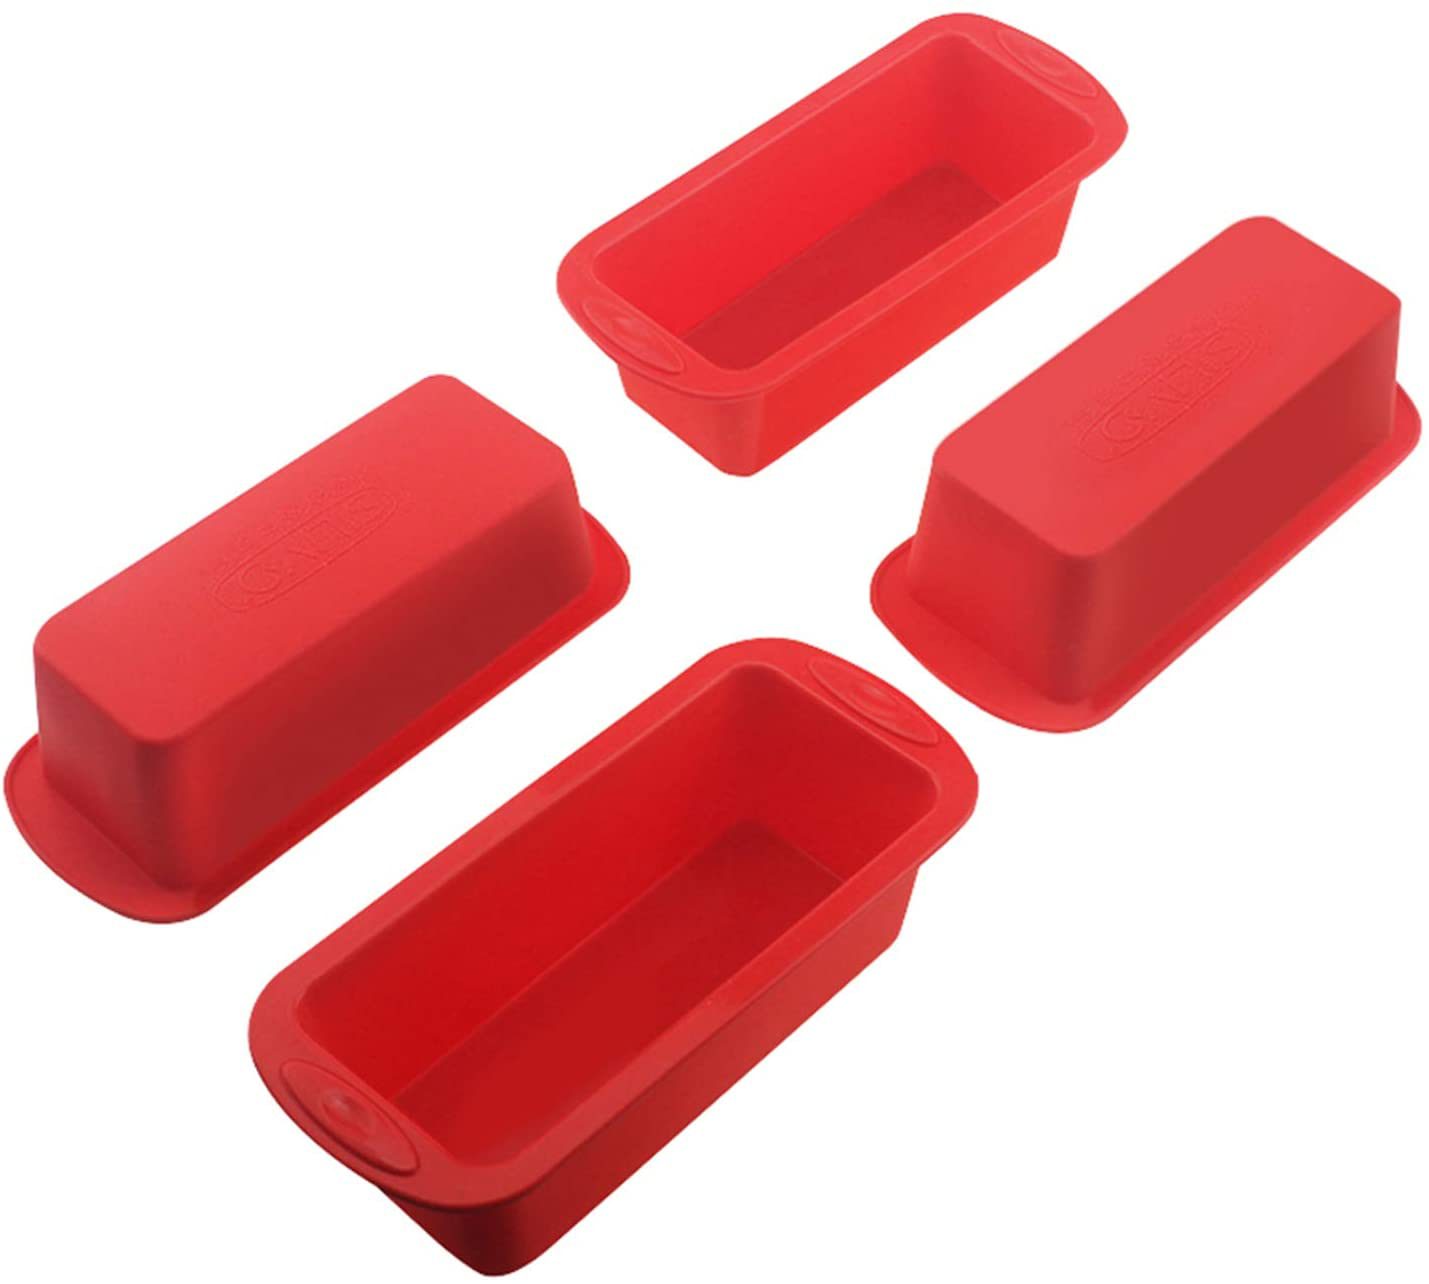 Set of 4 Silicone Mini Loaf Pan -- SILIVO Non-Stick Mini Loaf Baking Pans, Mini cake pan, Mini Bread Loaf pans for Cake, Bread , Meatloaf and Quiche - 5.7"x2.5"x2.2"